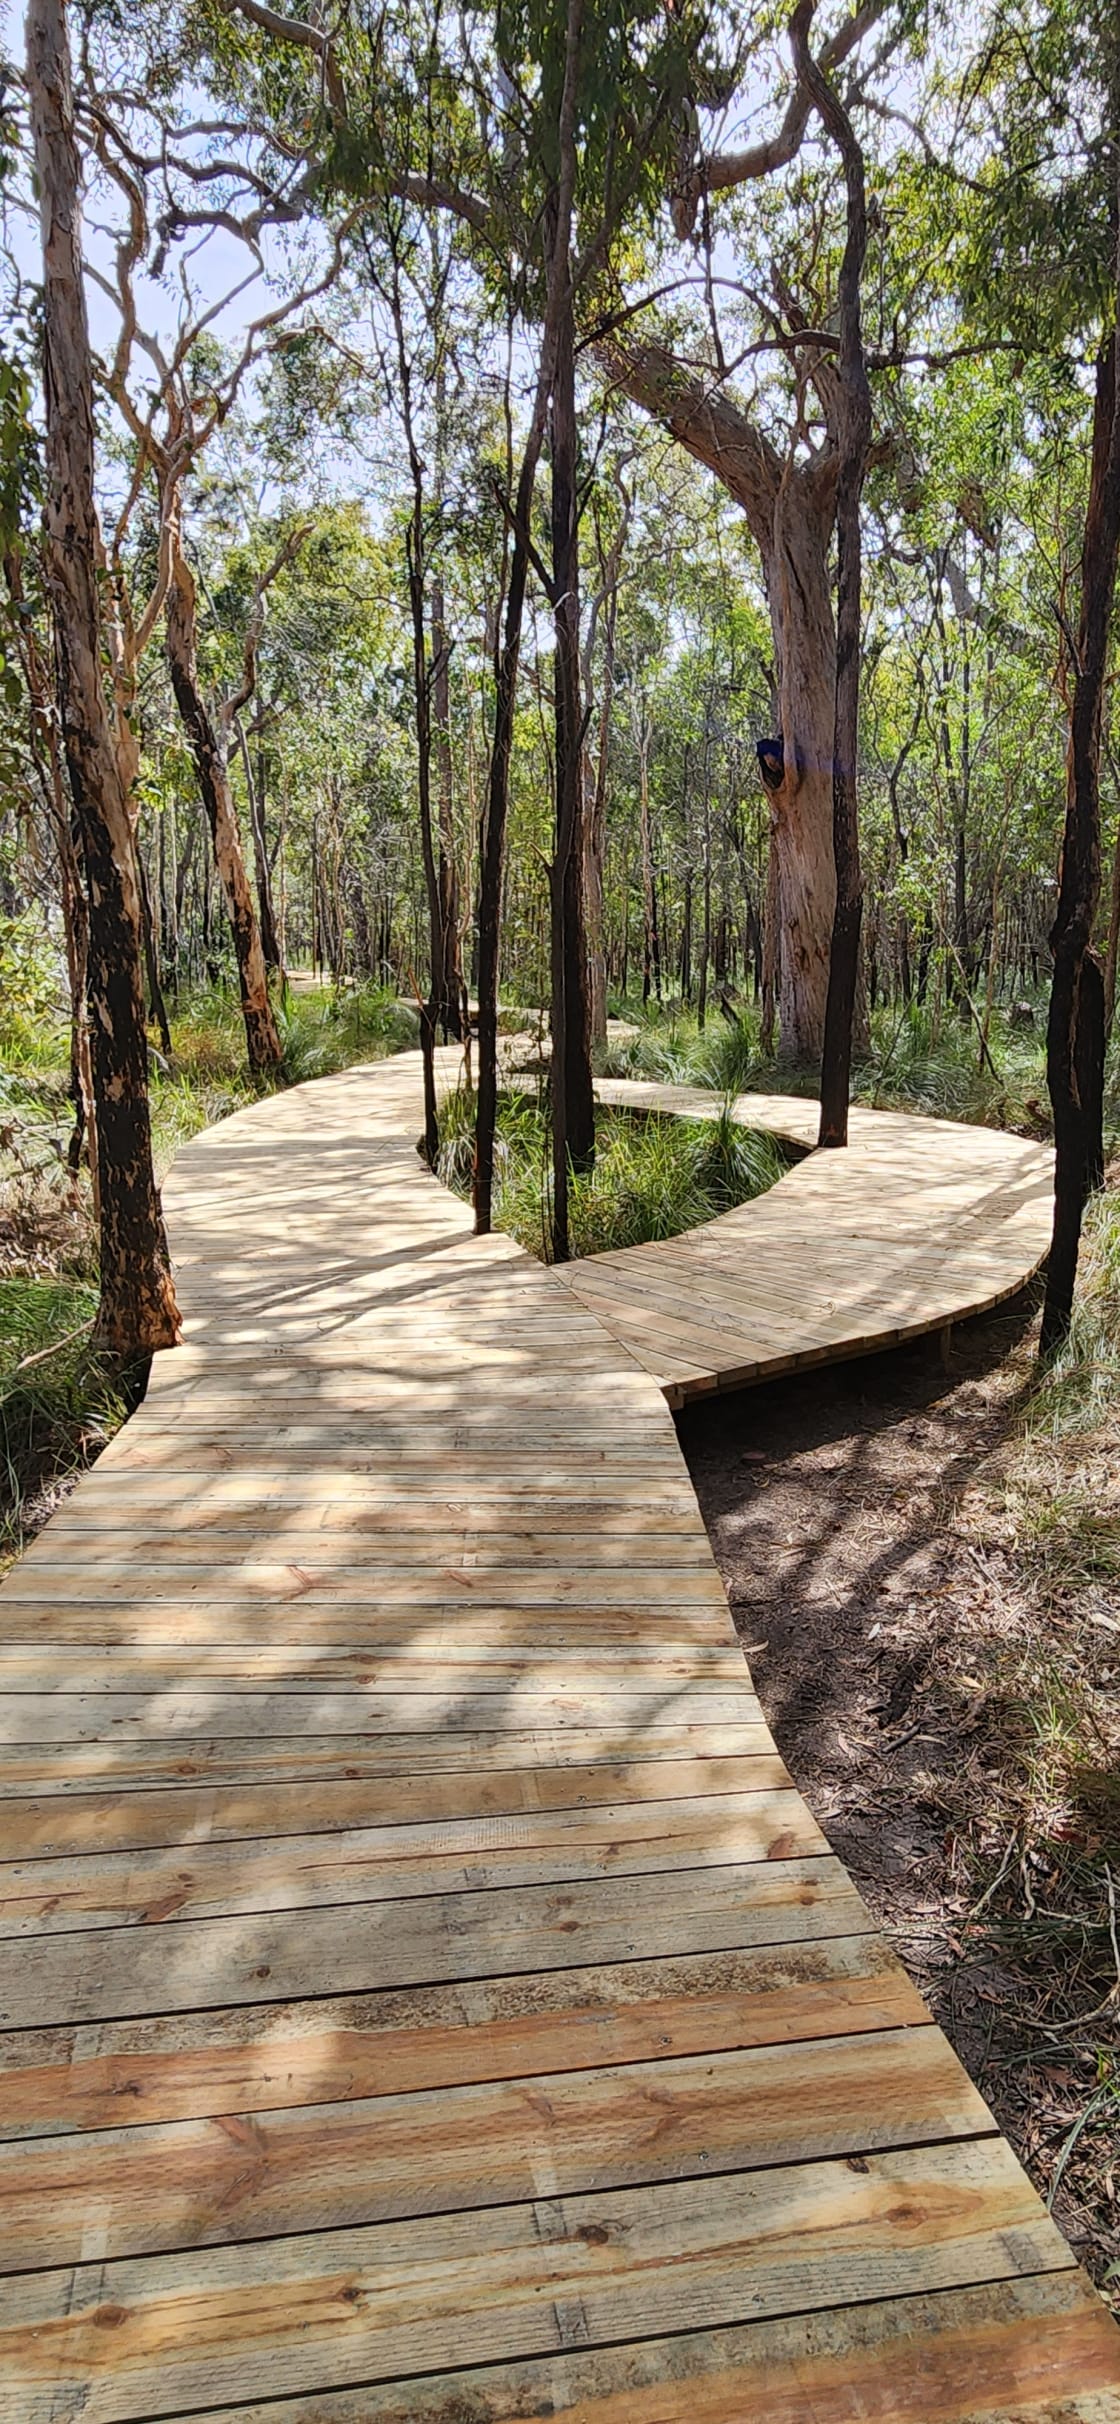 The newest attraction on the Discovery Coast! 386.6 m long boardwalk, complimentary access for our campers, wheelchair accessible